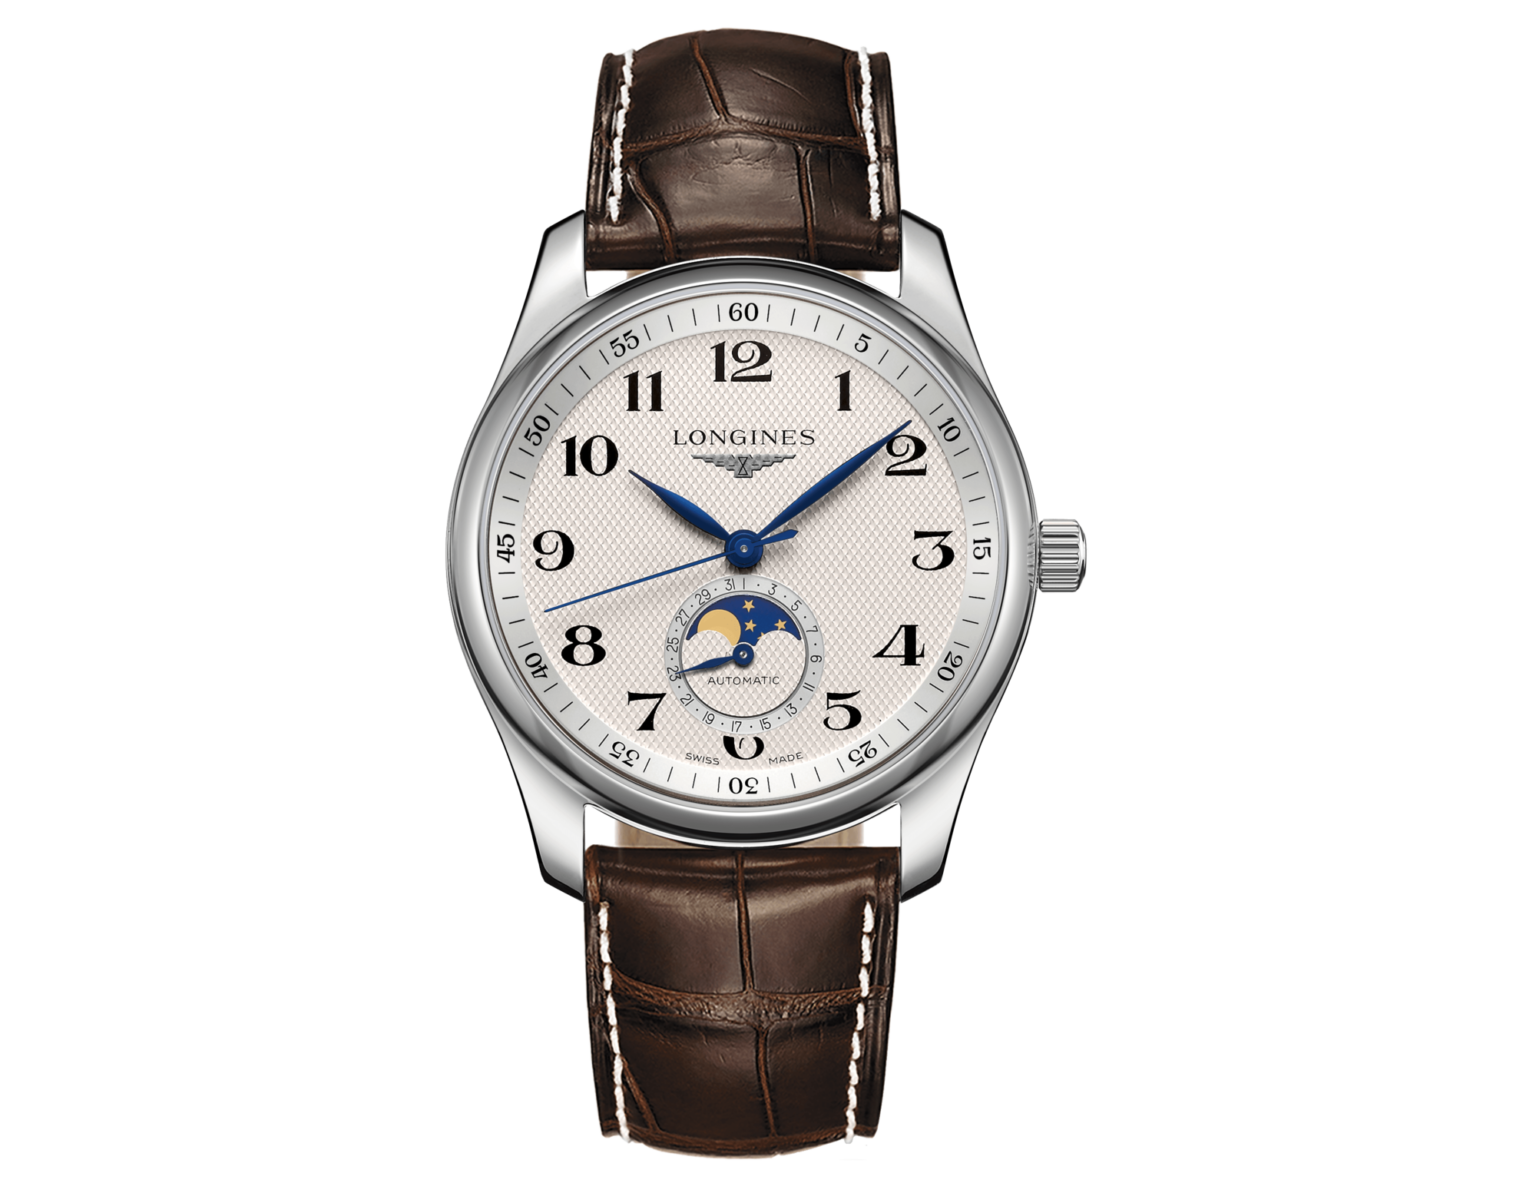 Longines Holiday Horology Gift Guide | aBlogtoWatch